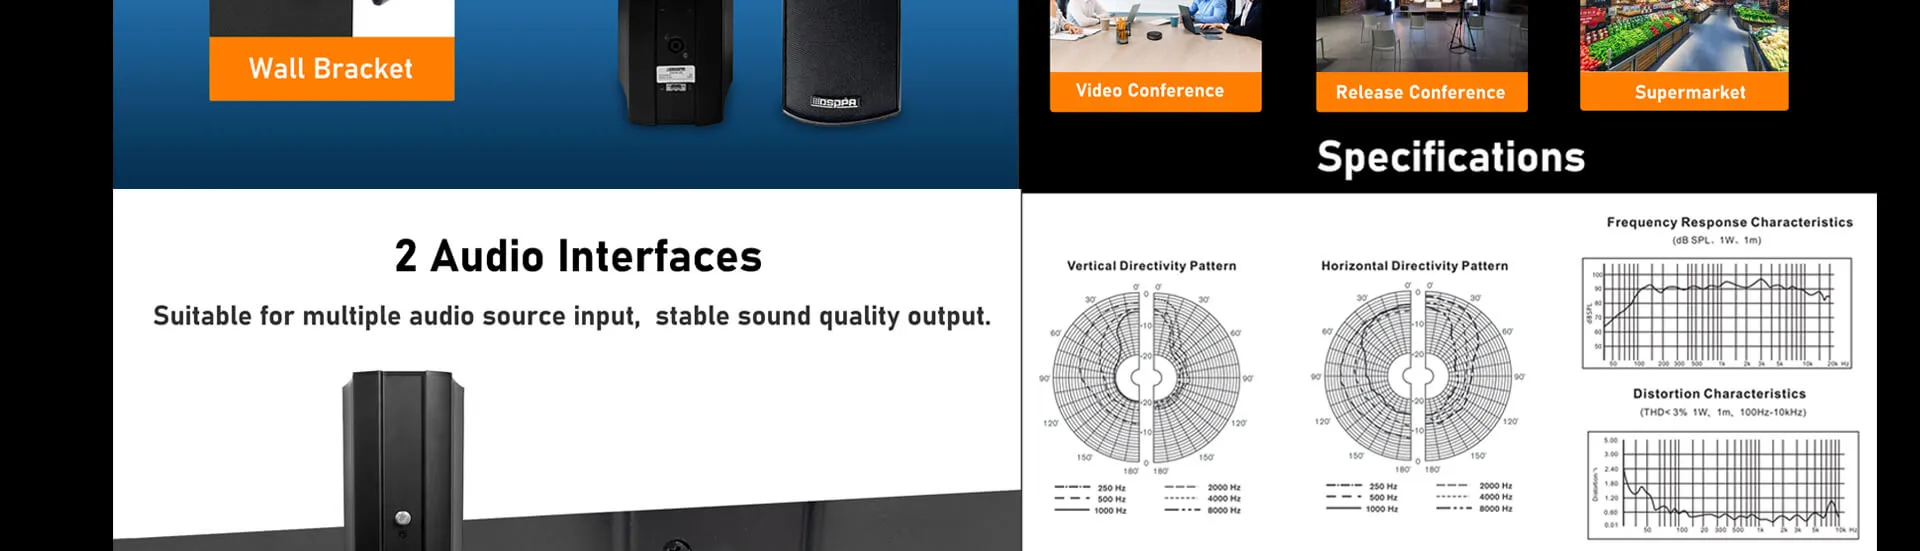 120W Professional Conference Speaker